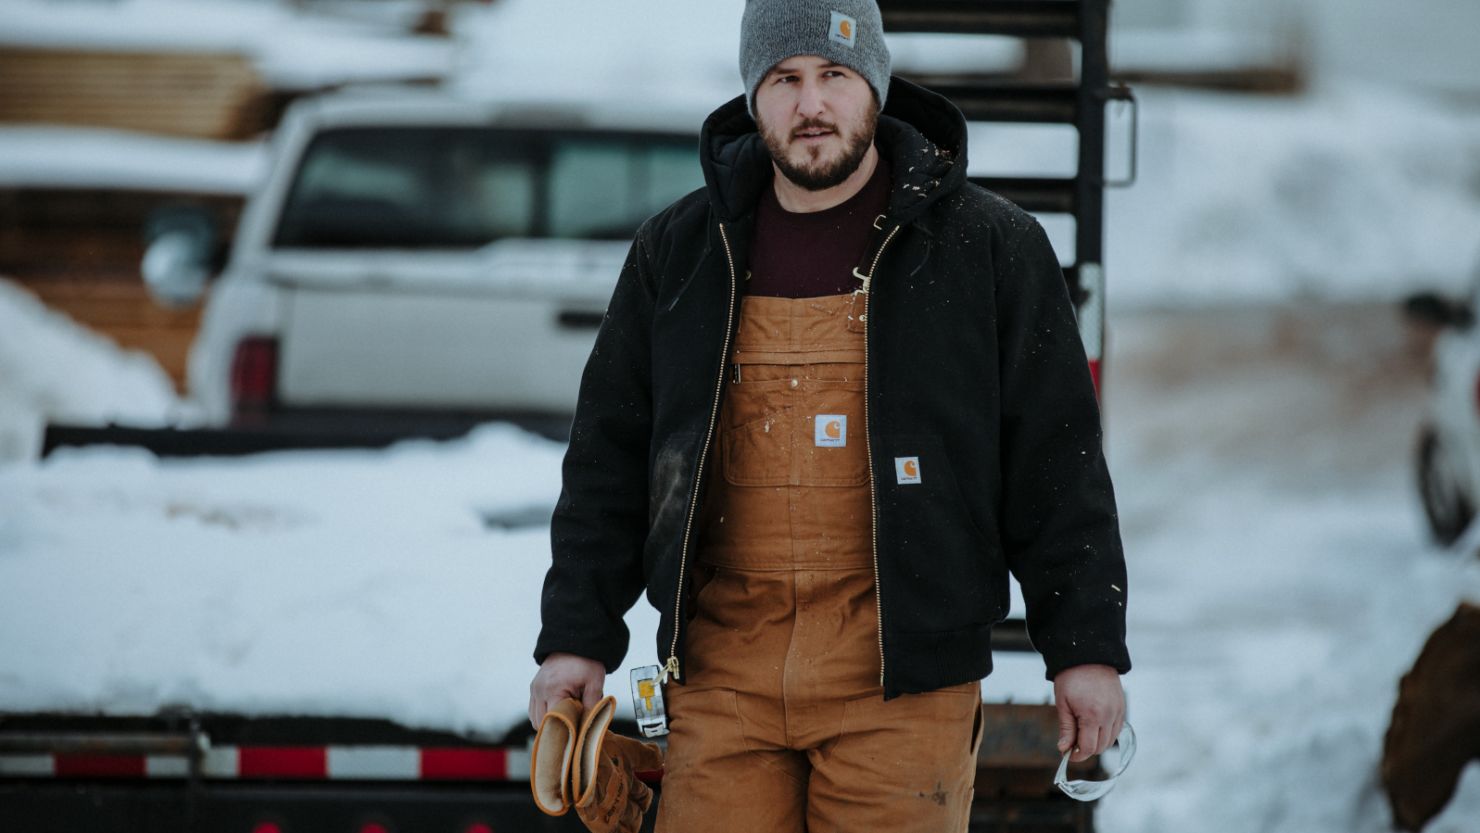 Carhartt - Every day is a holiday when Carhartt's got you covered